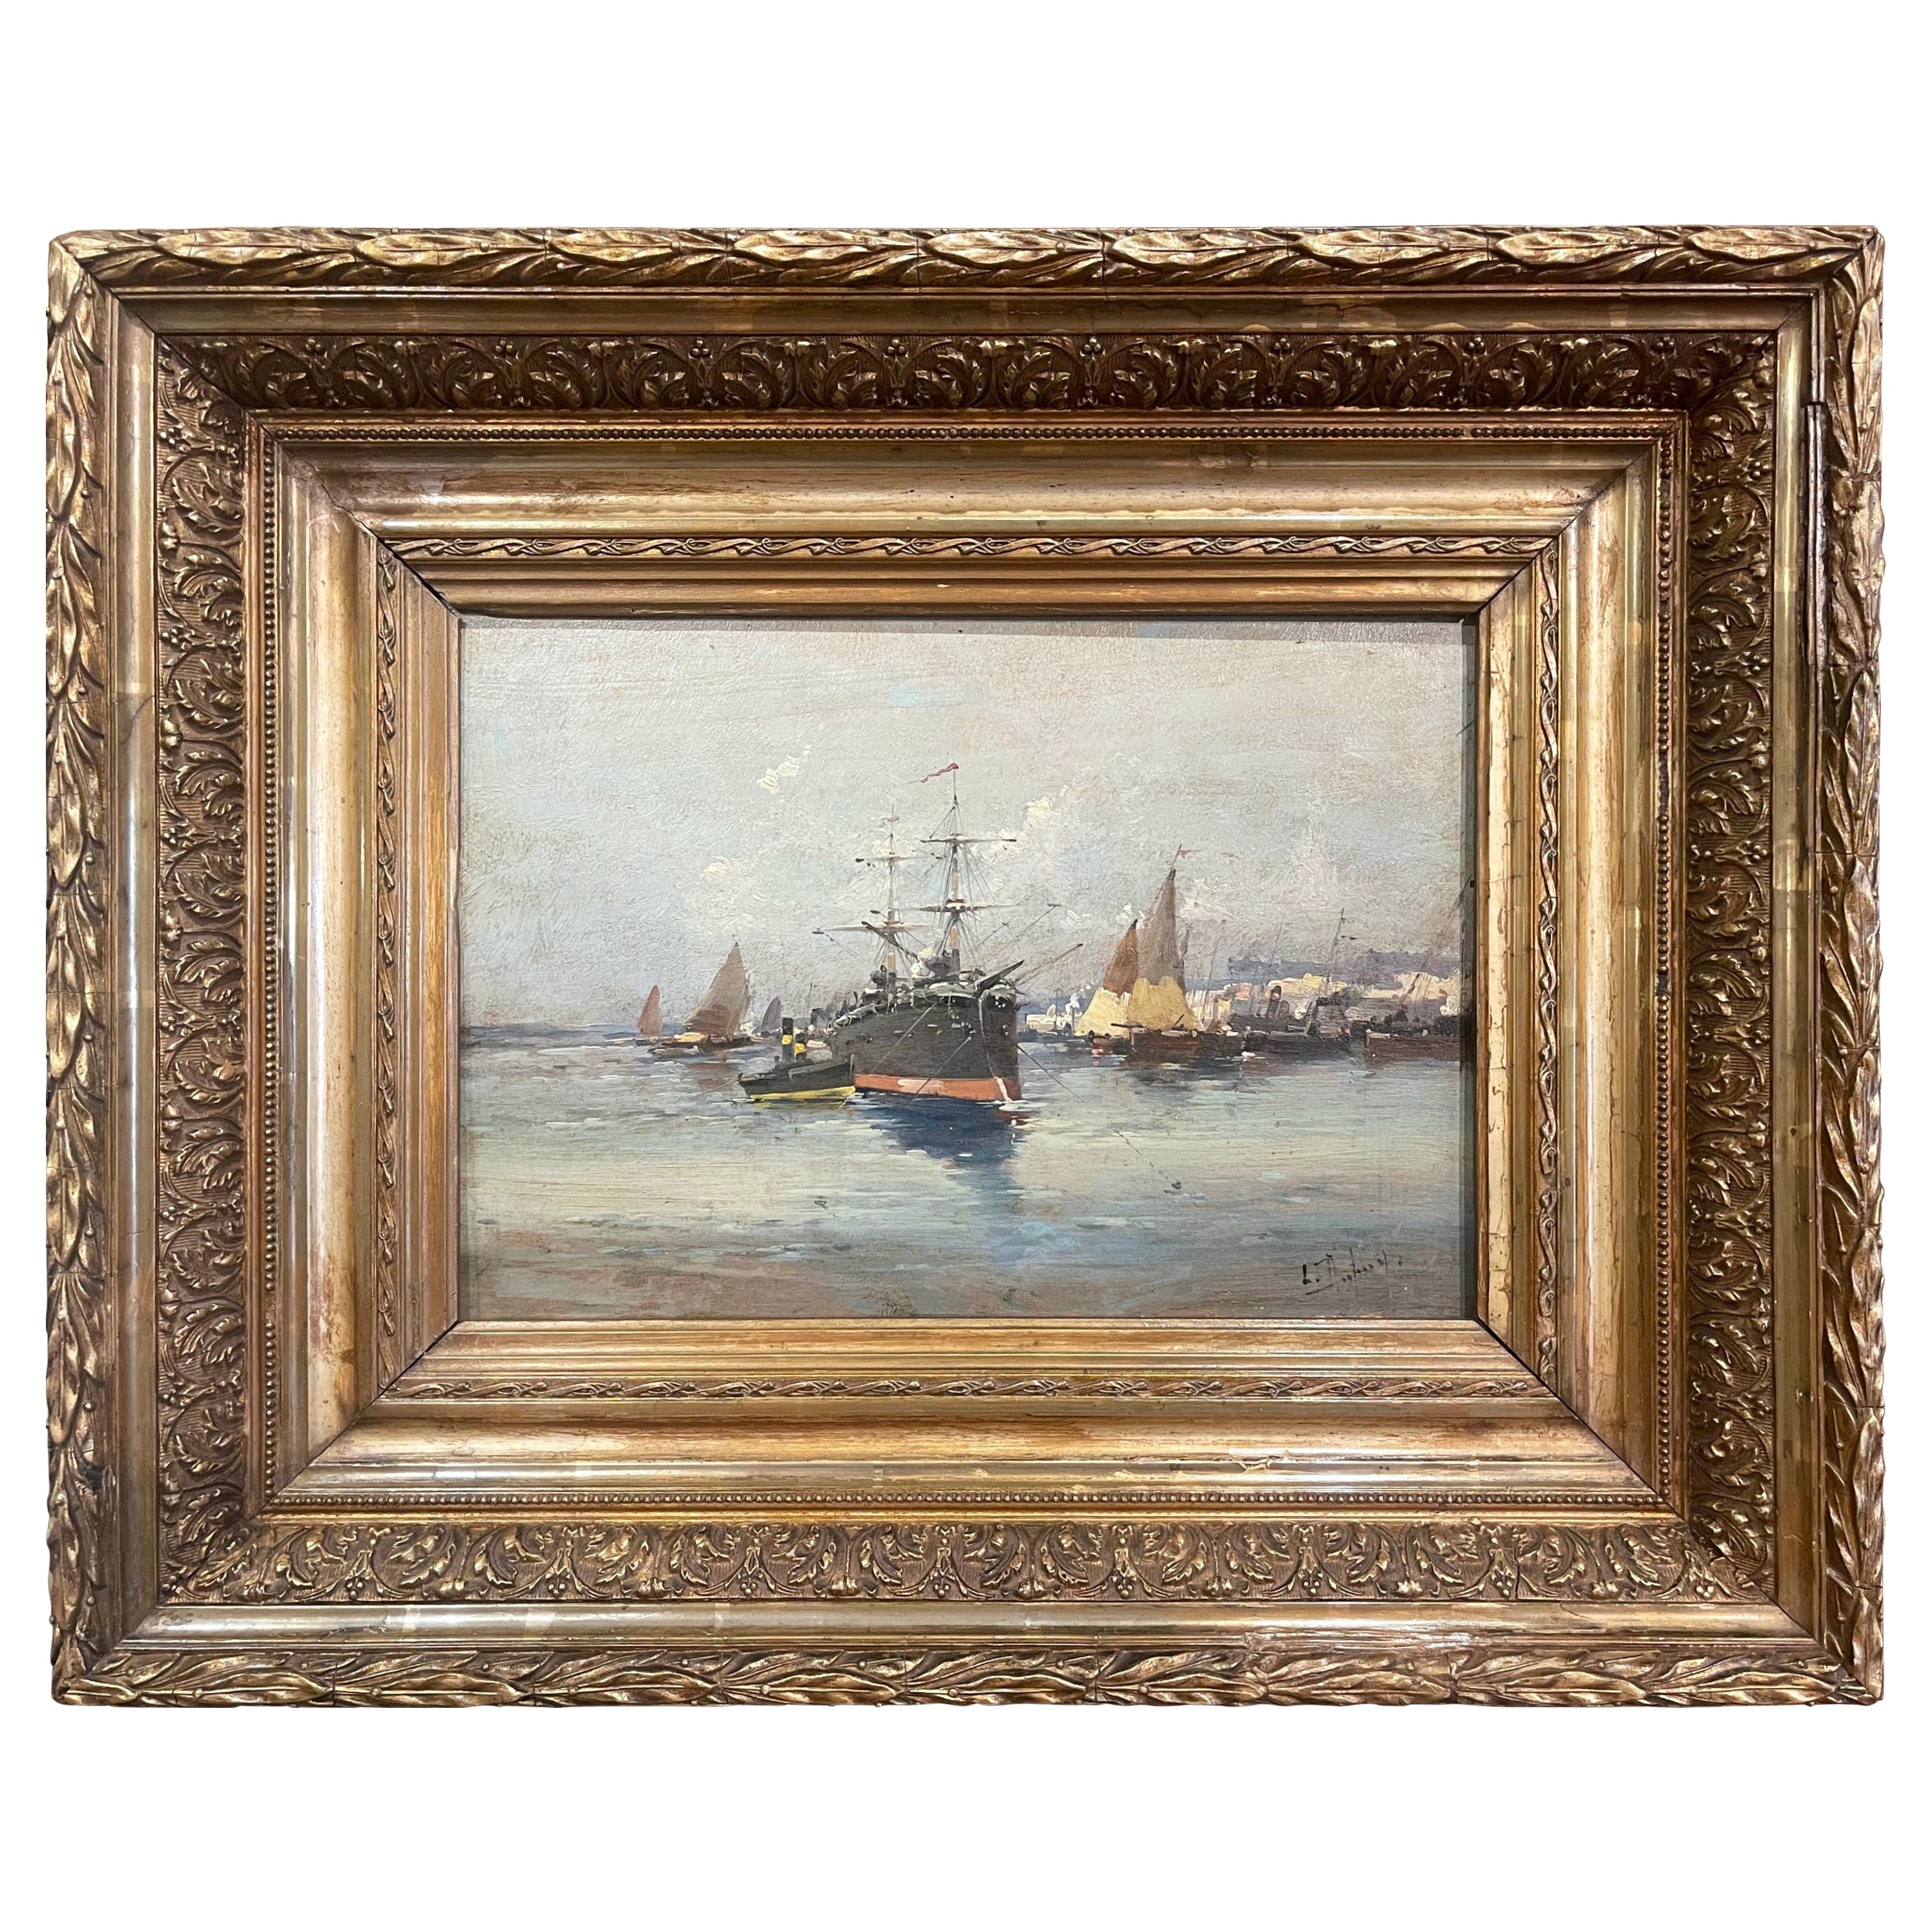 19th Century Oil Ship Painting in Gilt Frame Signed Dupuy for E. Galien-Laloue